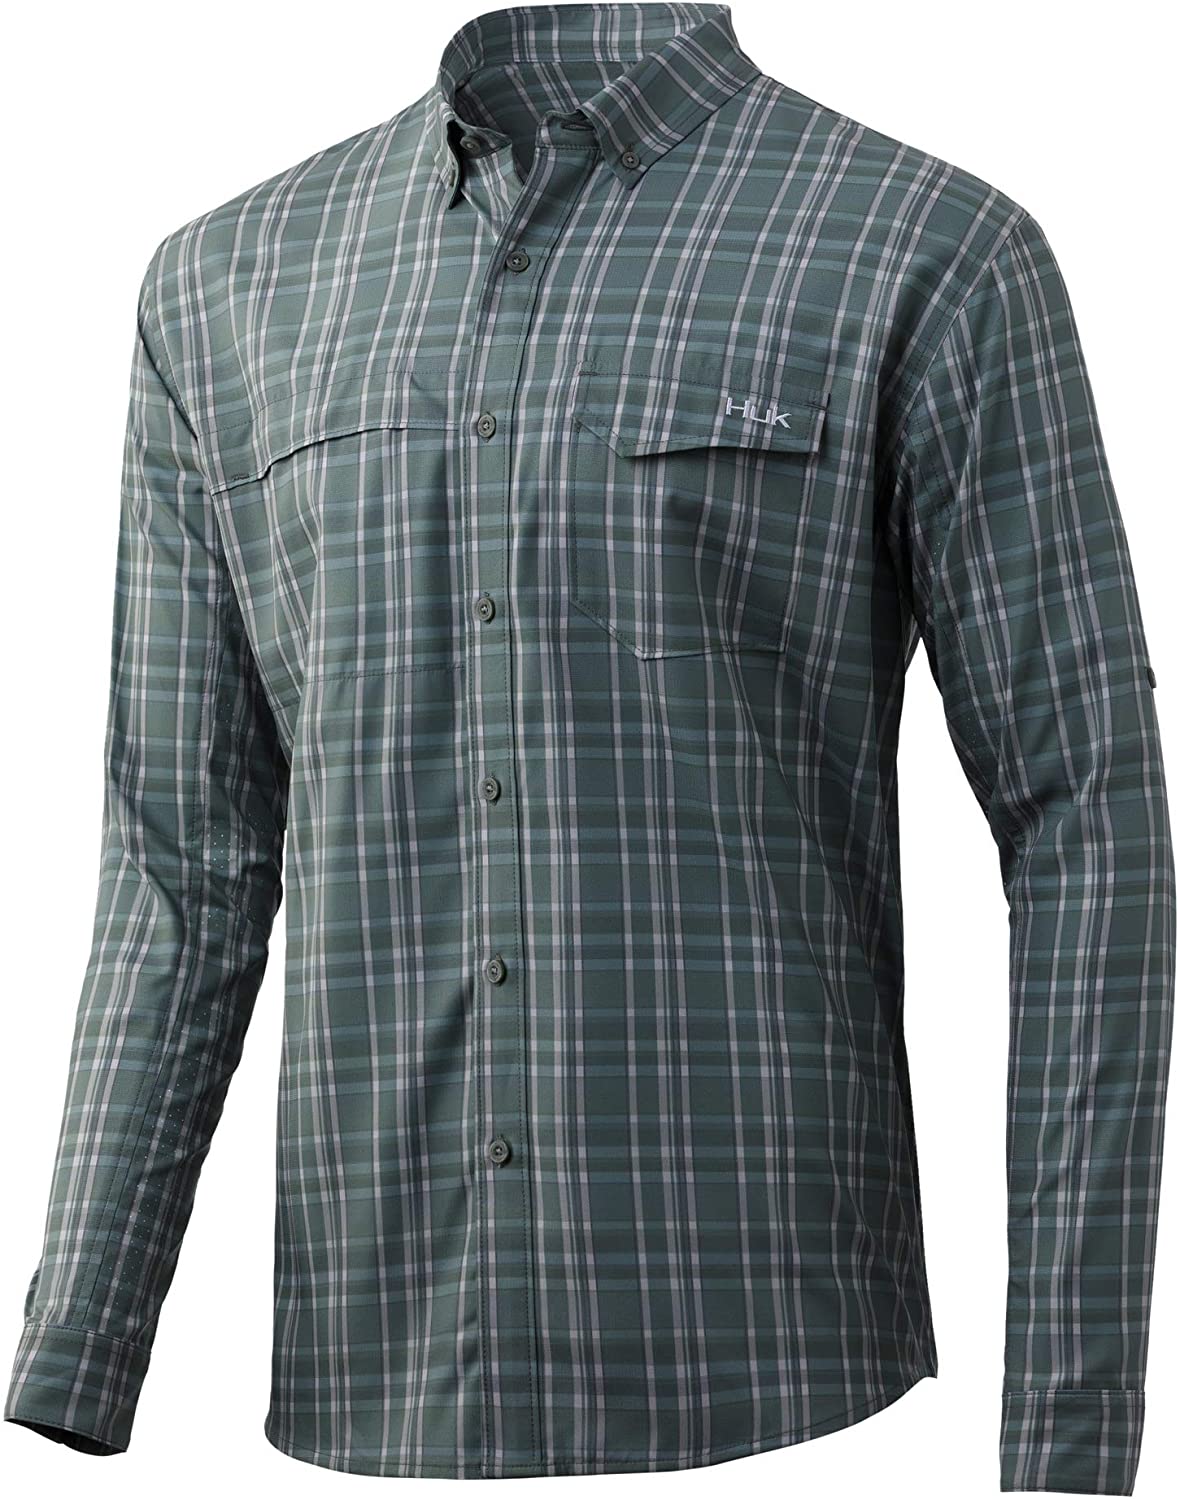 Huk Performance Tide Point Woven Plaid Checked Shirt Long Sleeve Sz XL for sale online 